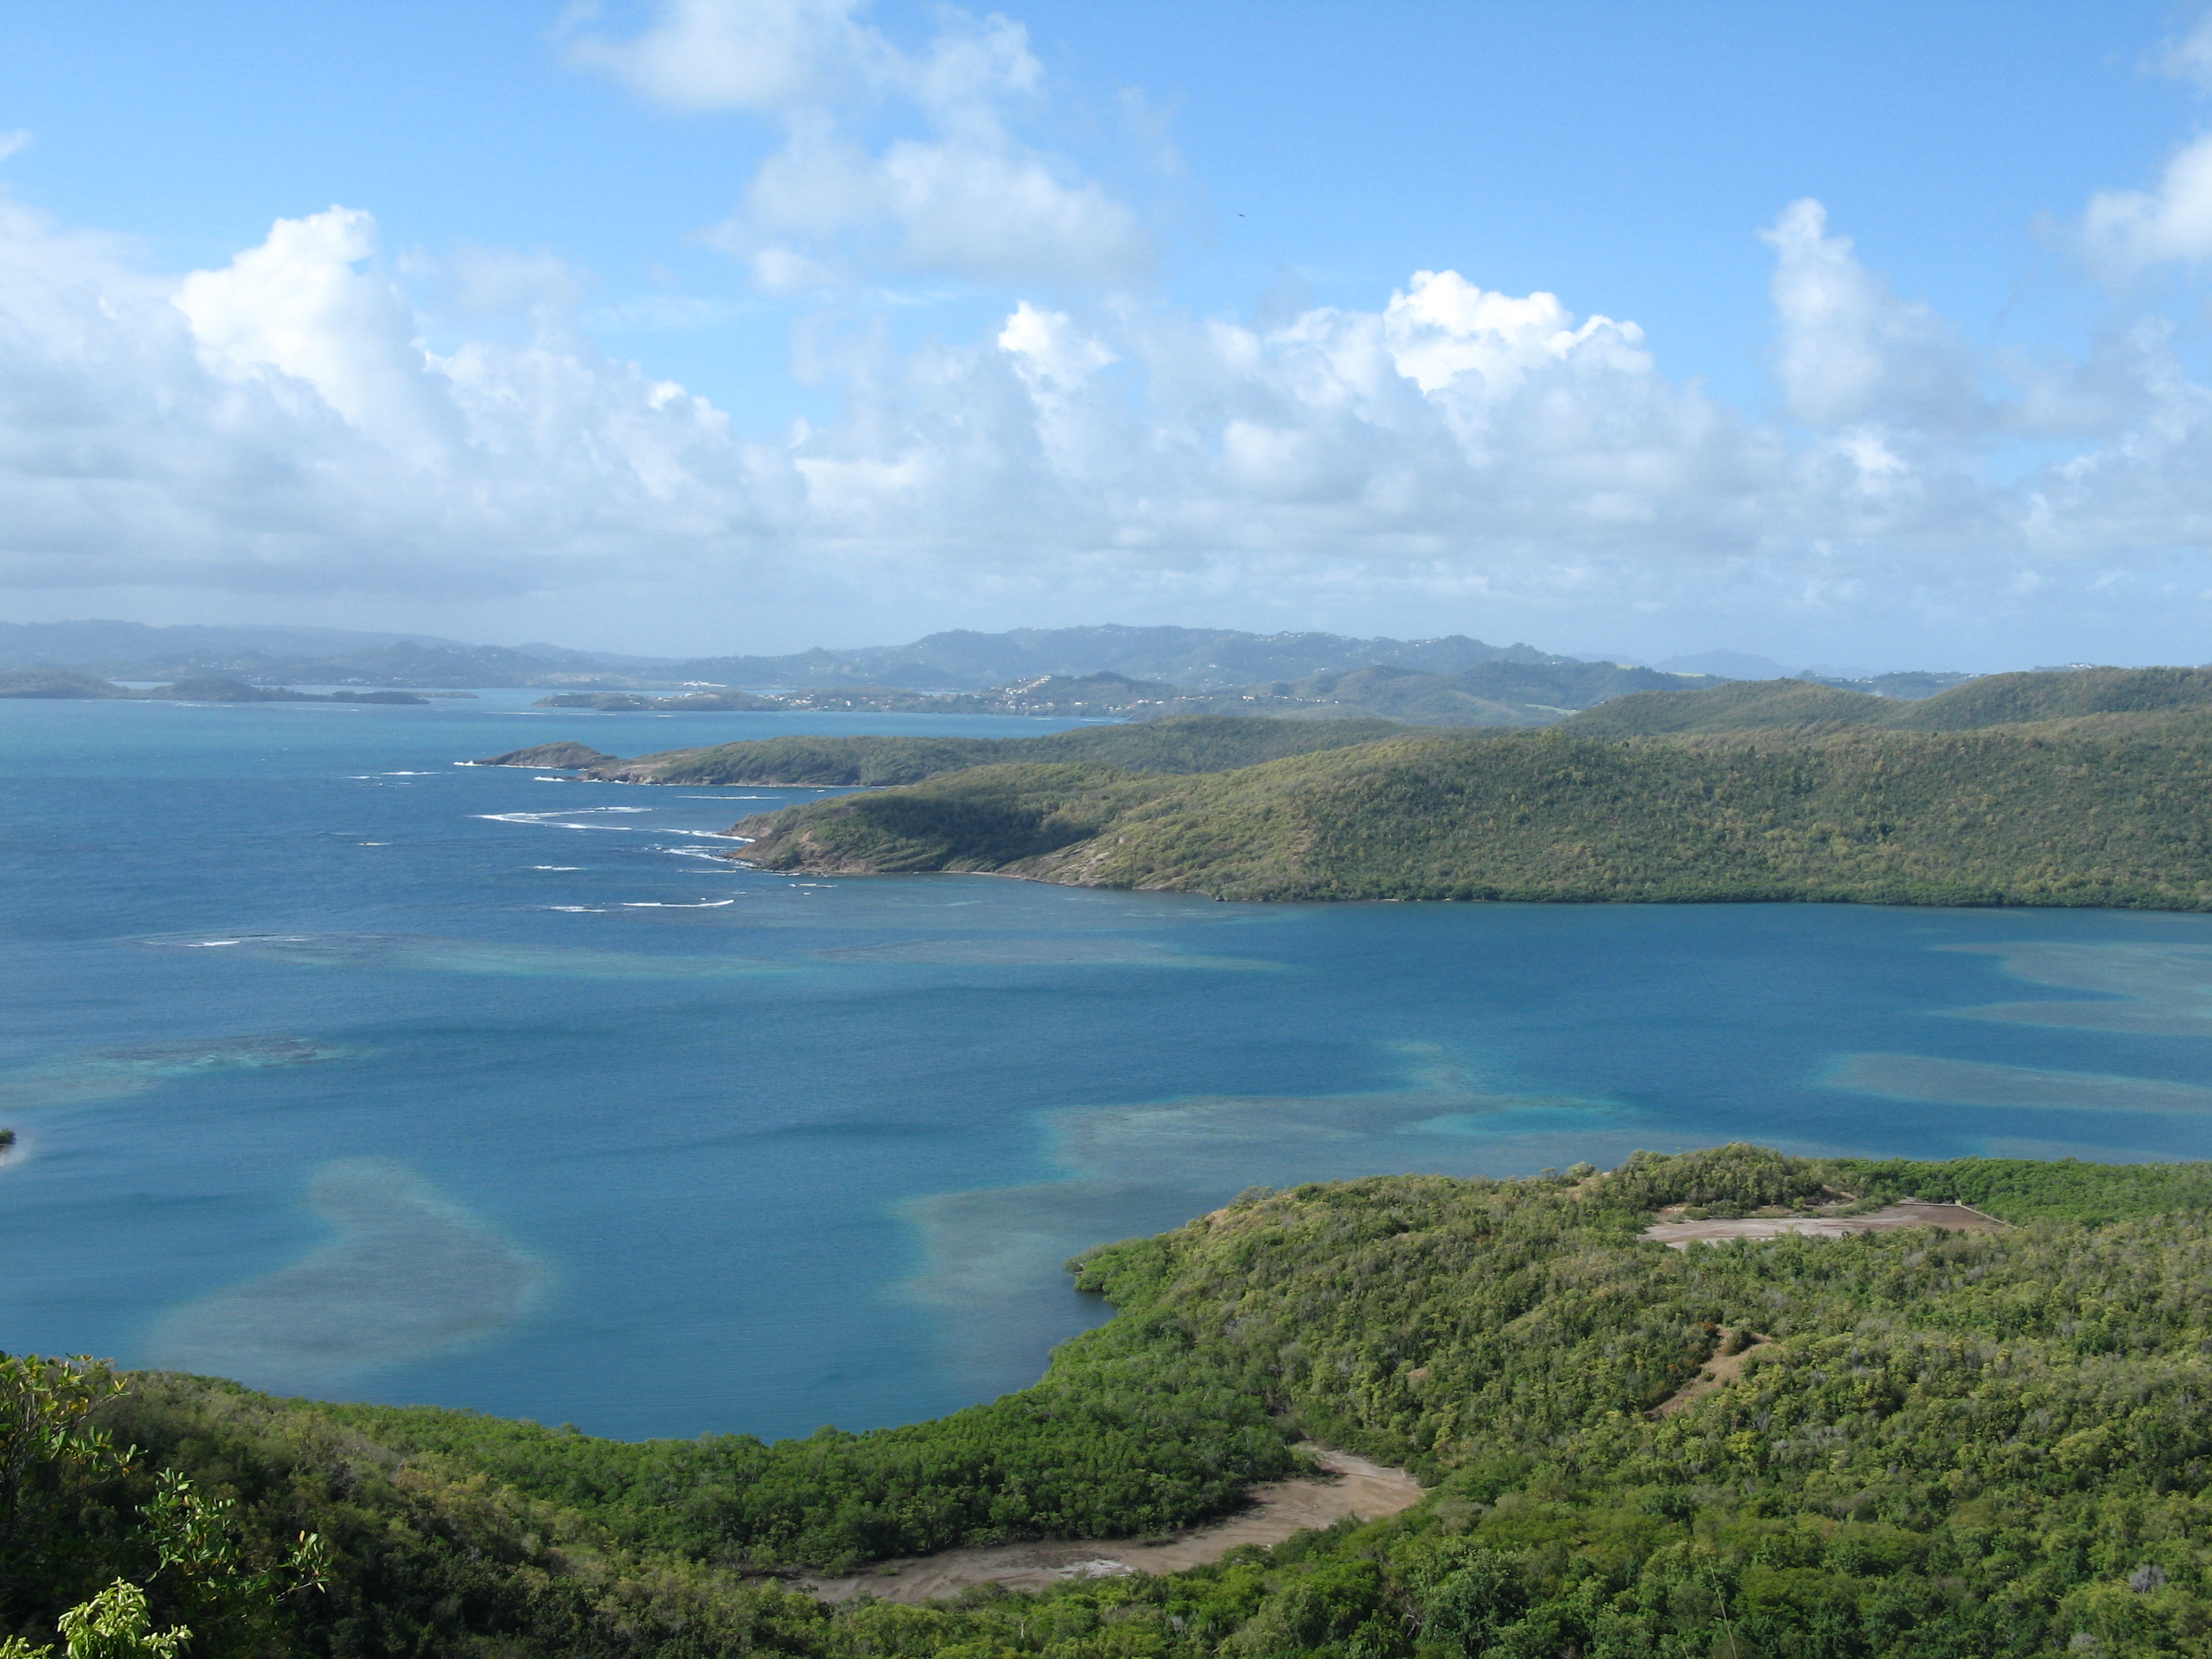 Our Guadeloupe sailing route has a lot to offer